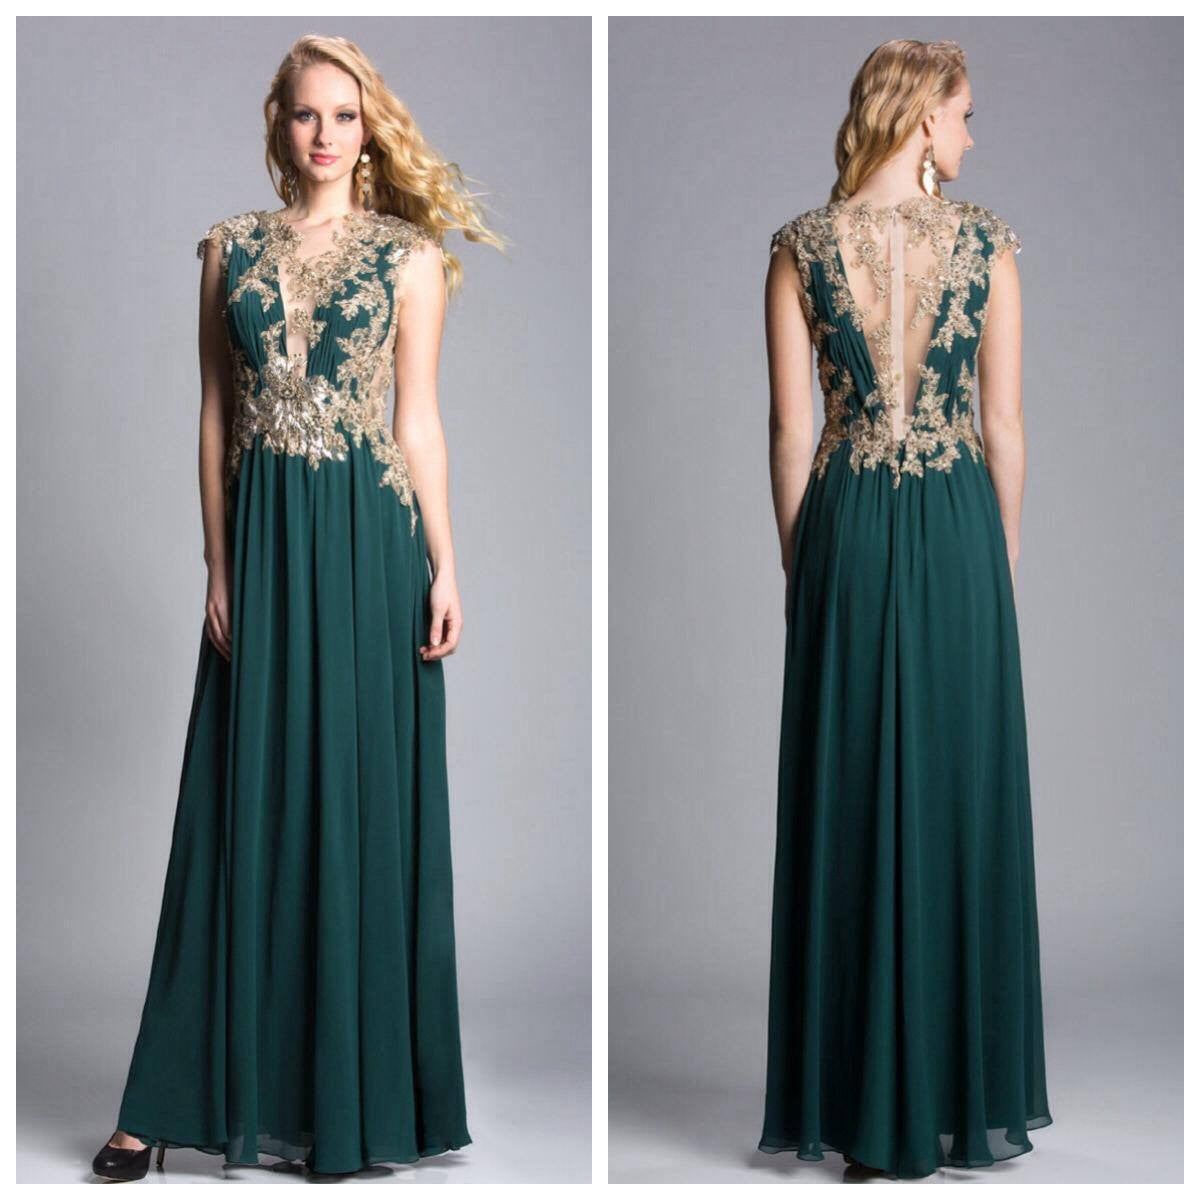 Feriani 18377 Champagne and Emerald Goddess Gown